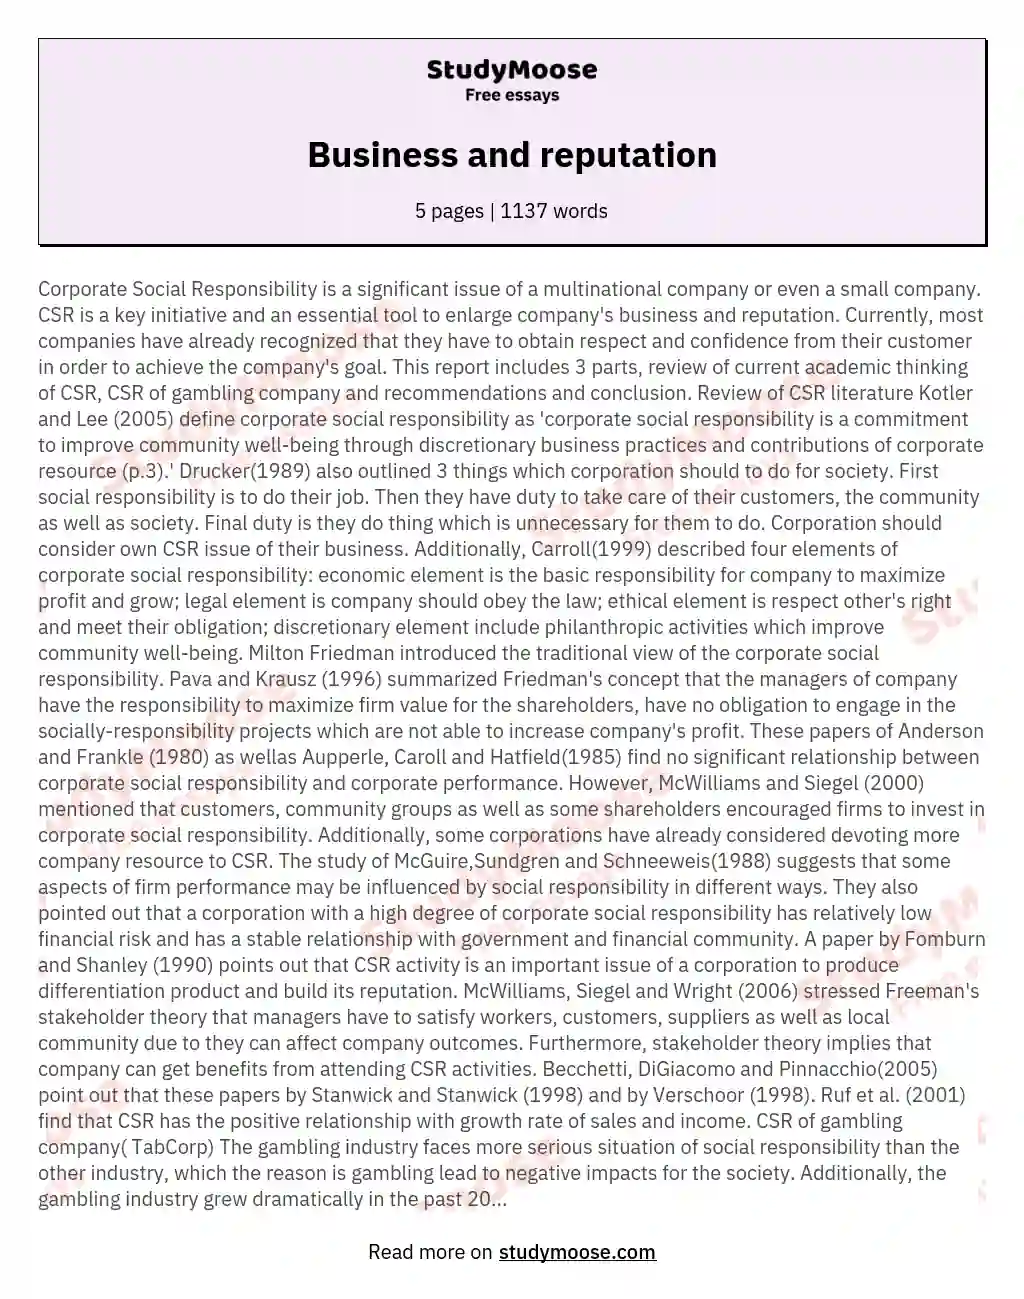 Business and reputation essay